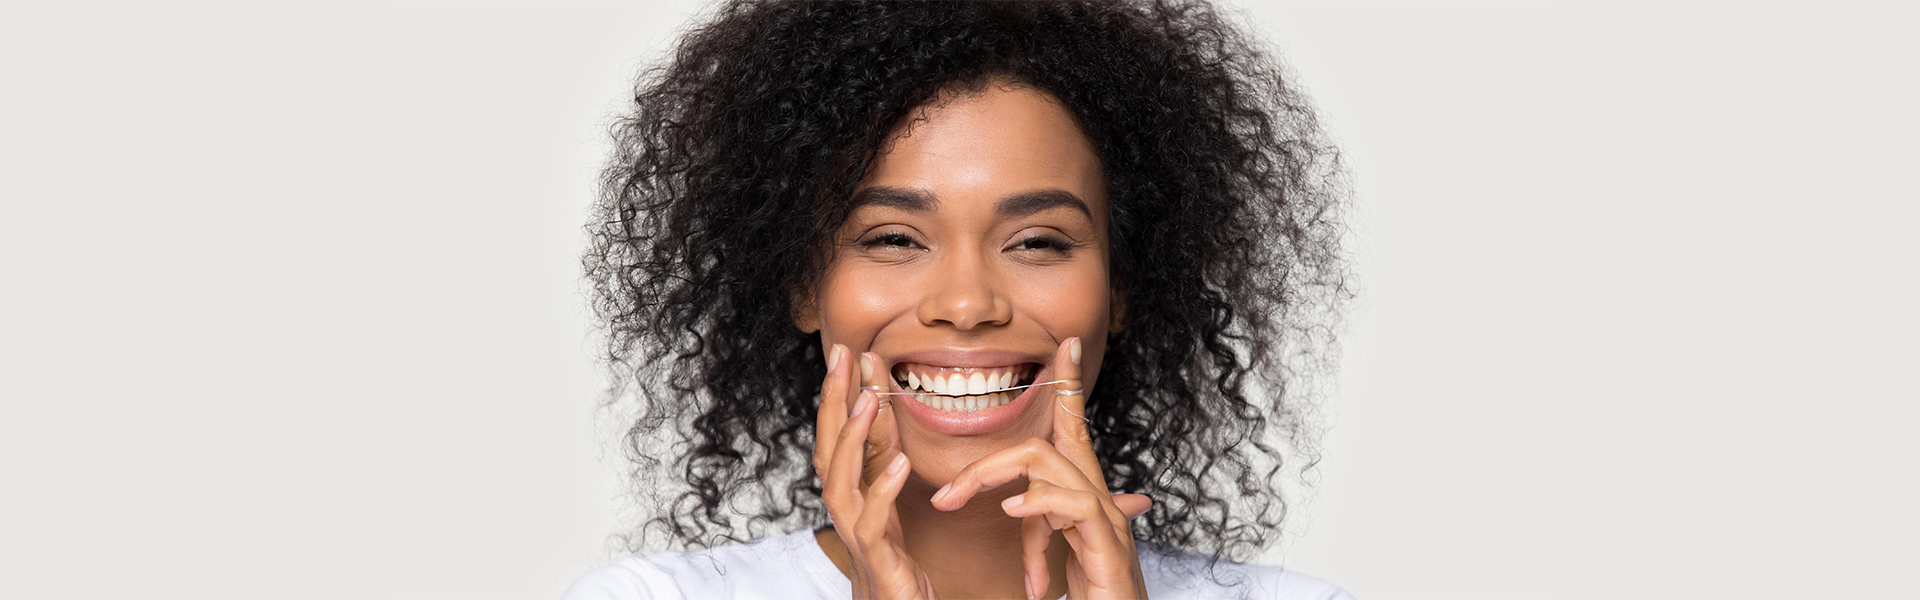 What You Need to Know About Teeth Whitening?